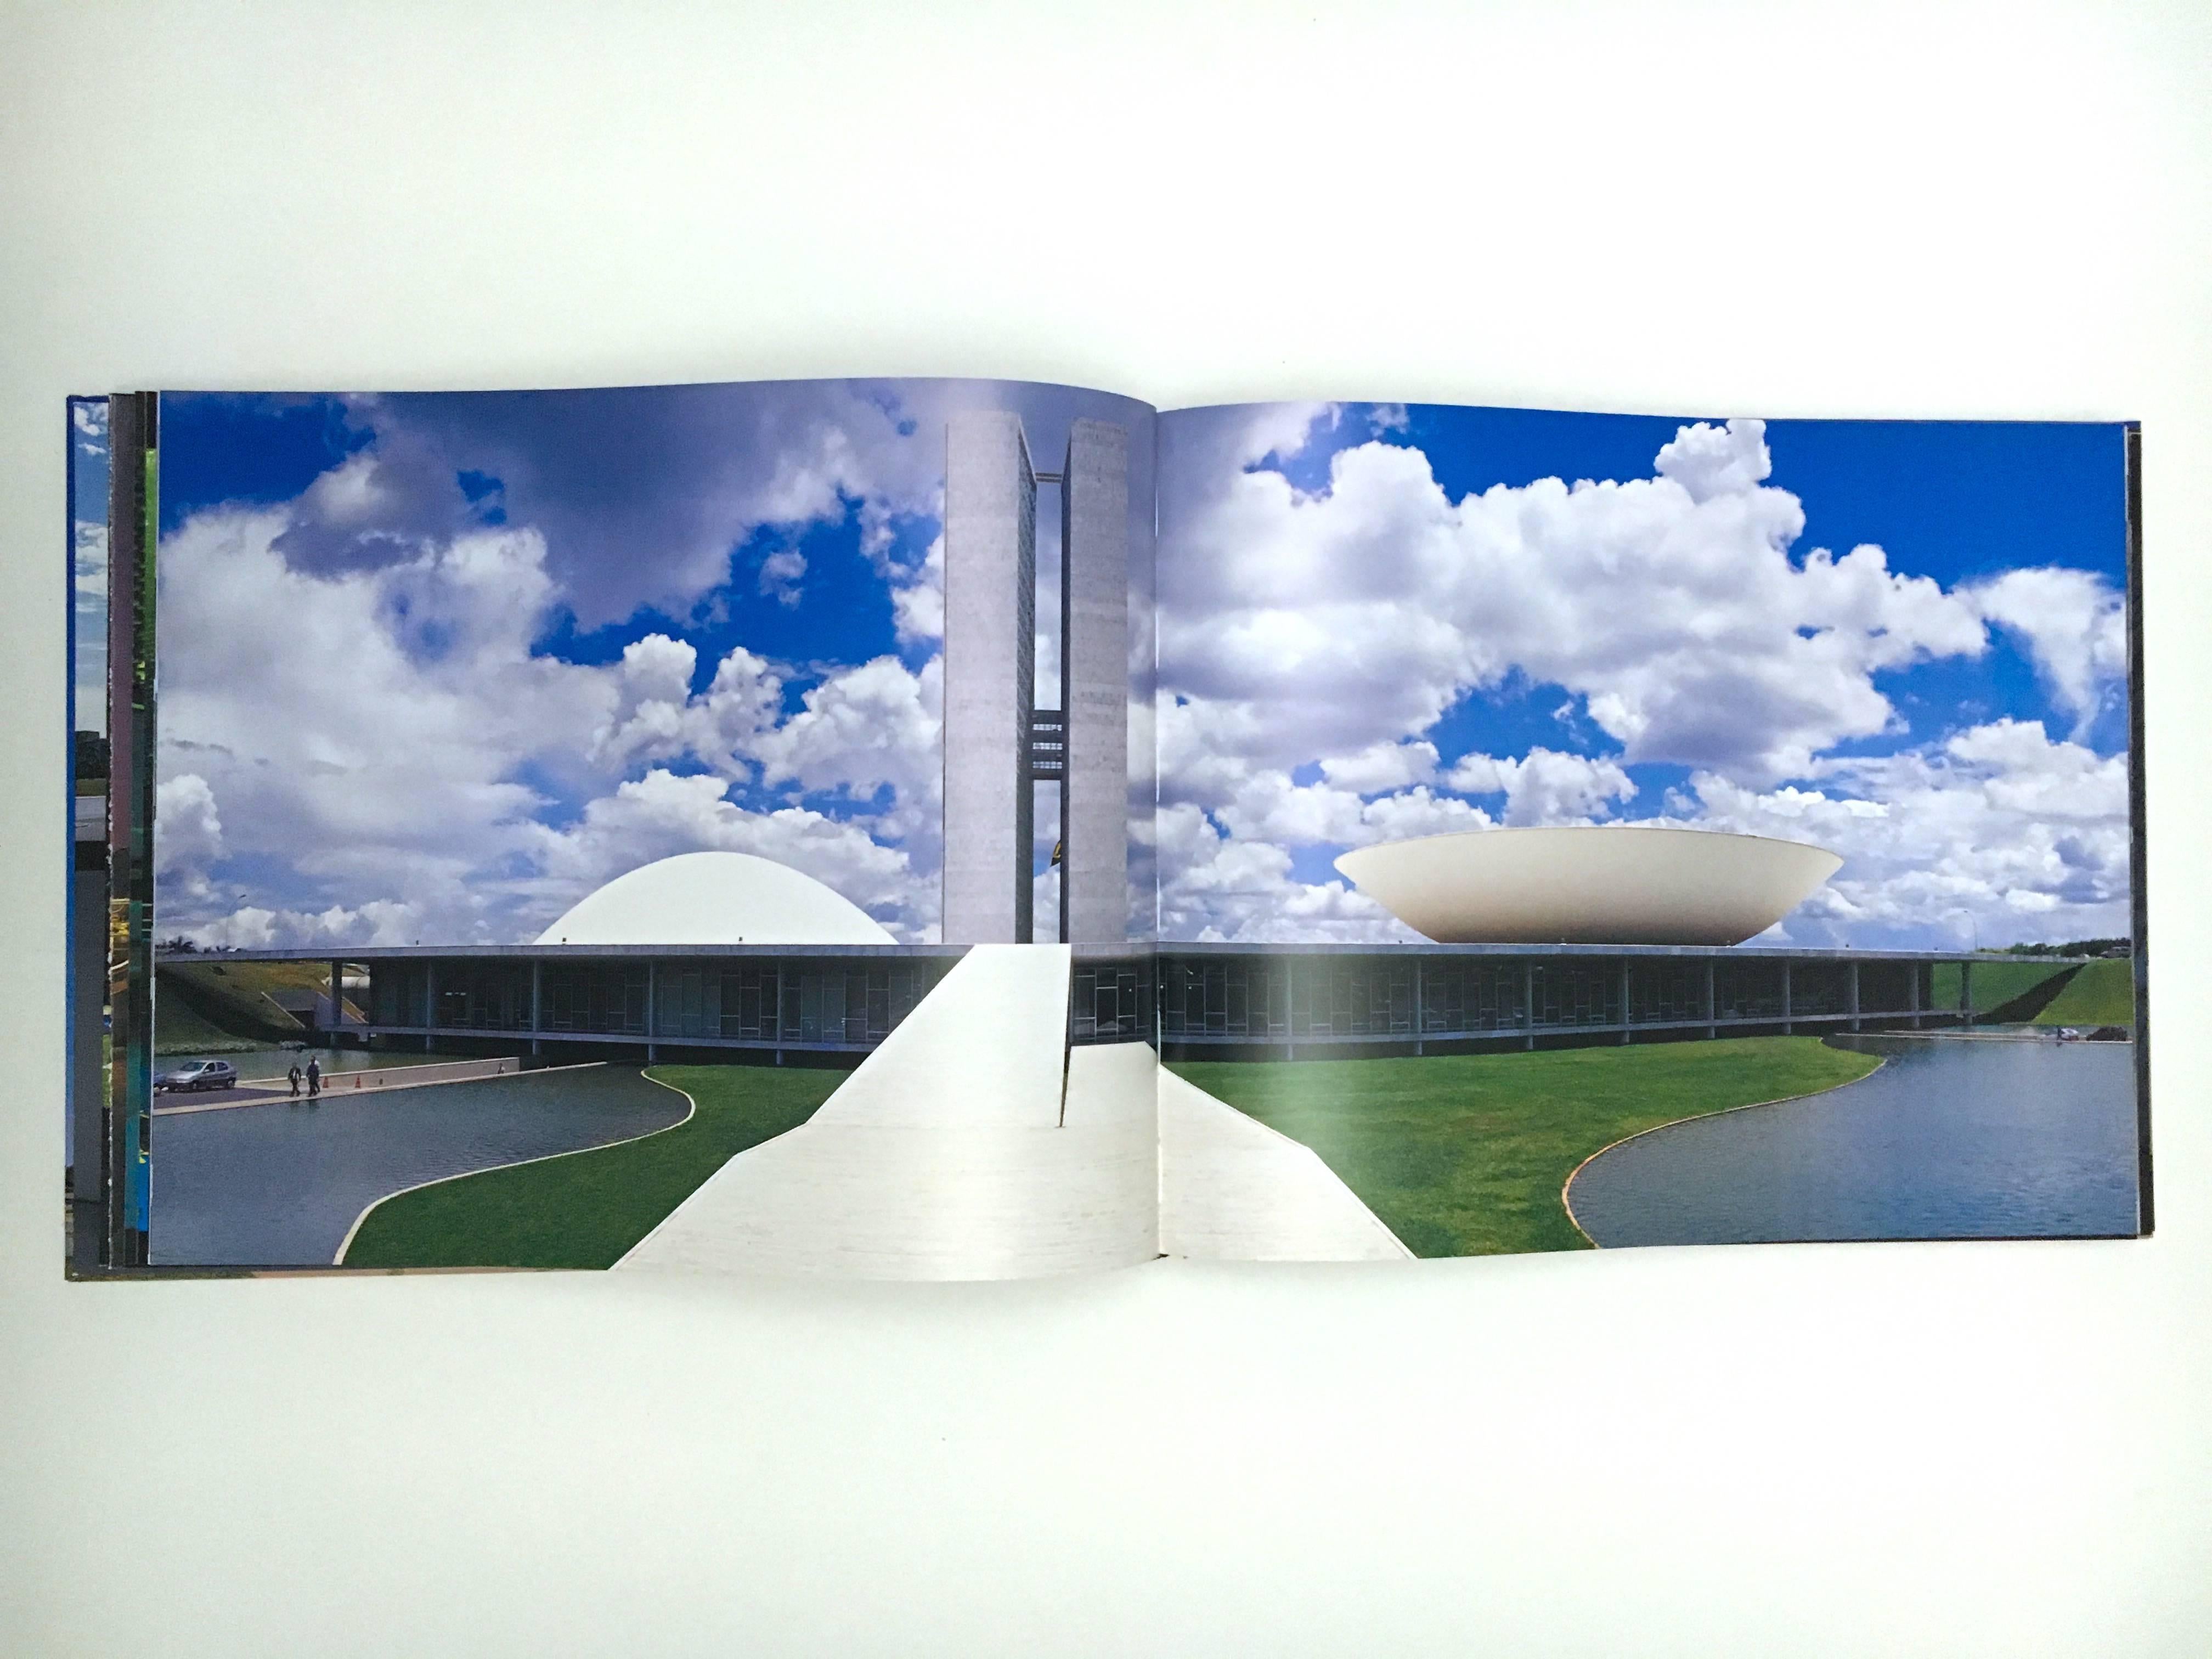 First edition, 360, Rio de Janeiro, 2006. Hardcover.

An impressive architectural monograph of works that span Oscar Niemeyer's industrious career. The full page and fold-out illustrations of the work were photographed impeccably by Luiz Claudio